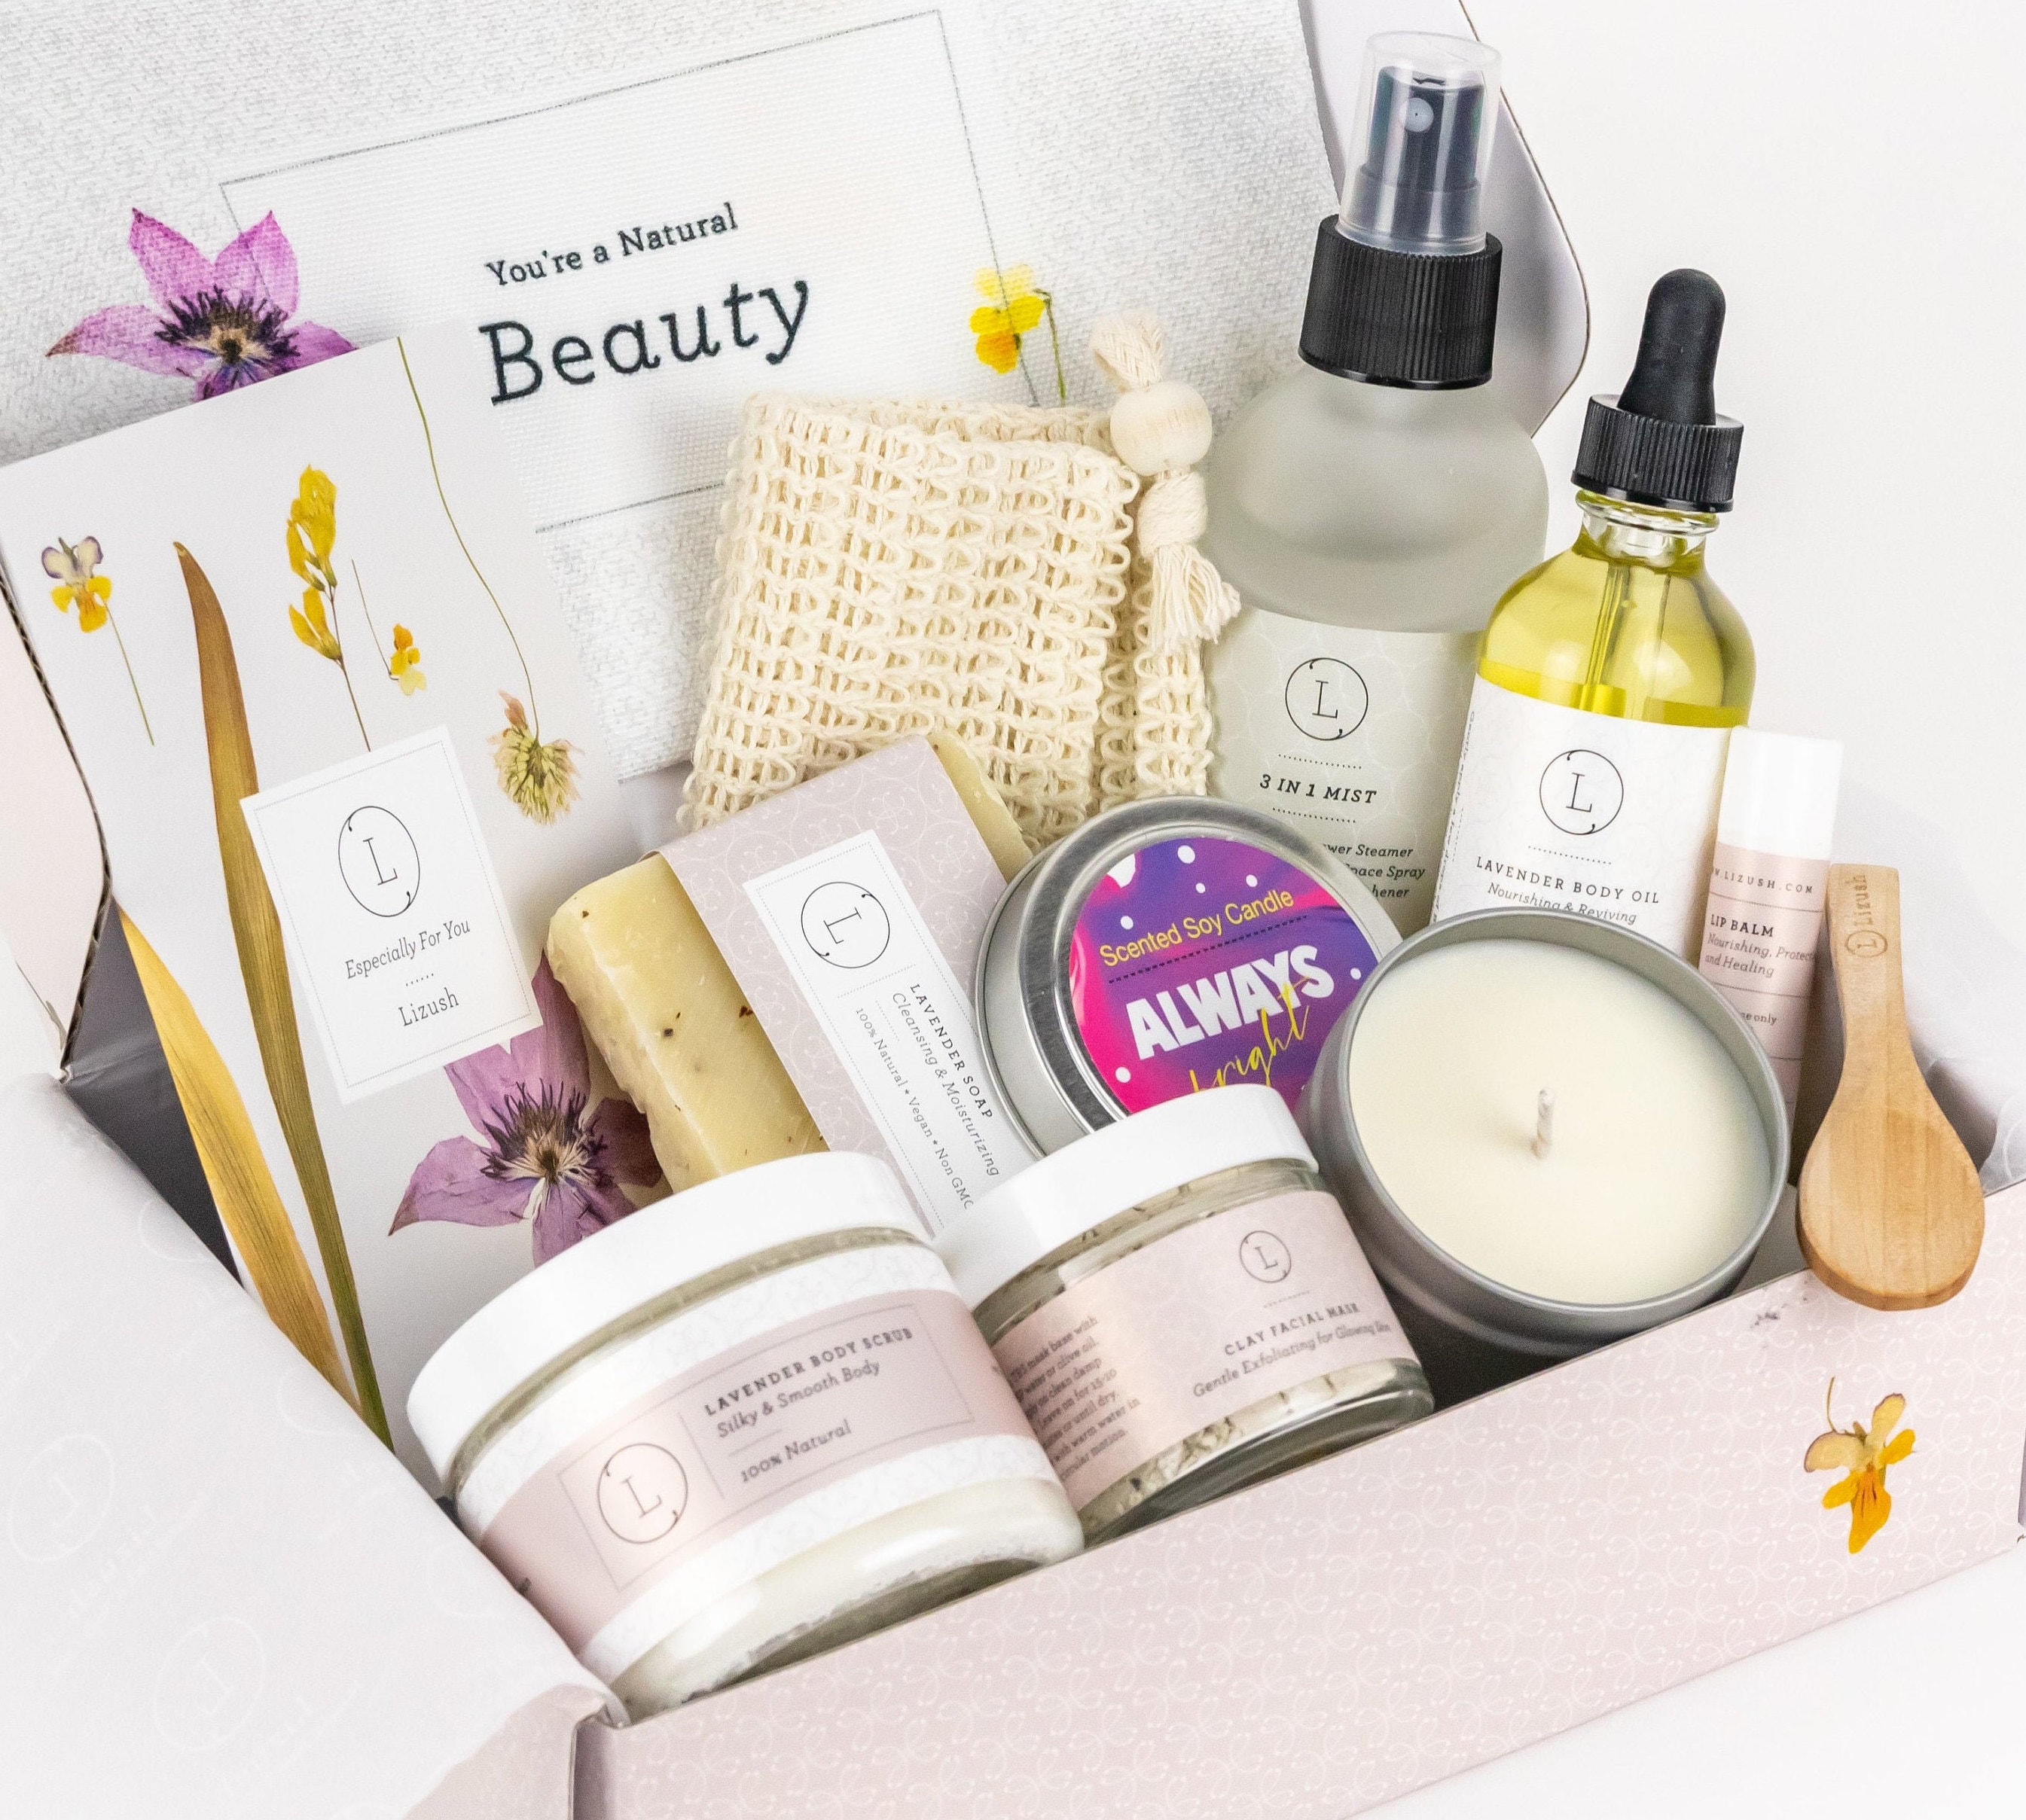 Mini Self-care Gift Set, Gifts Under 30 Dollars, Care Package for Her 